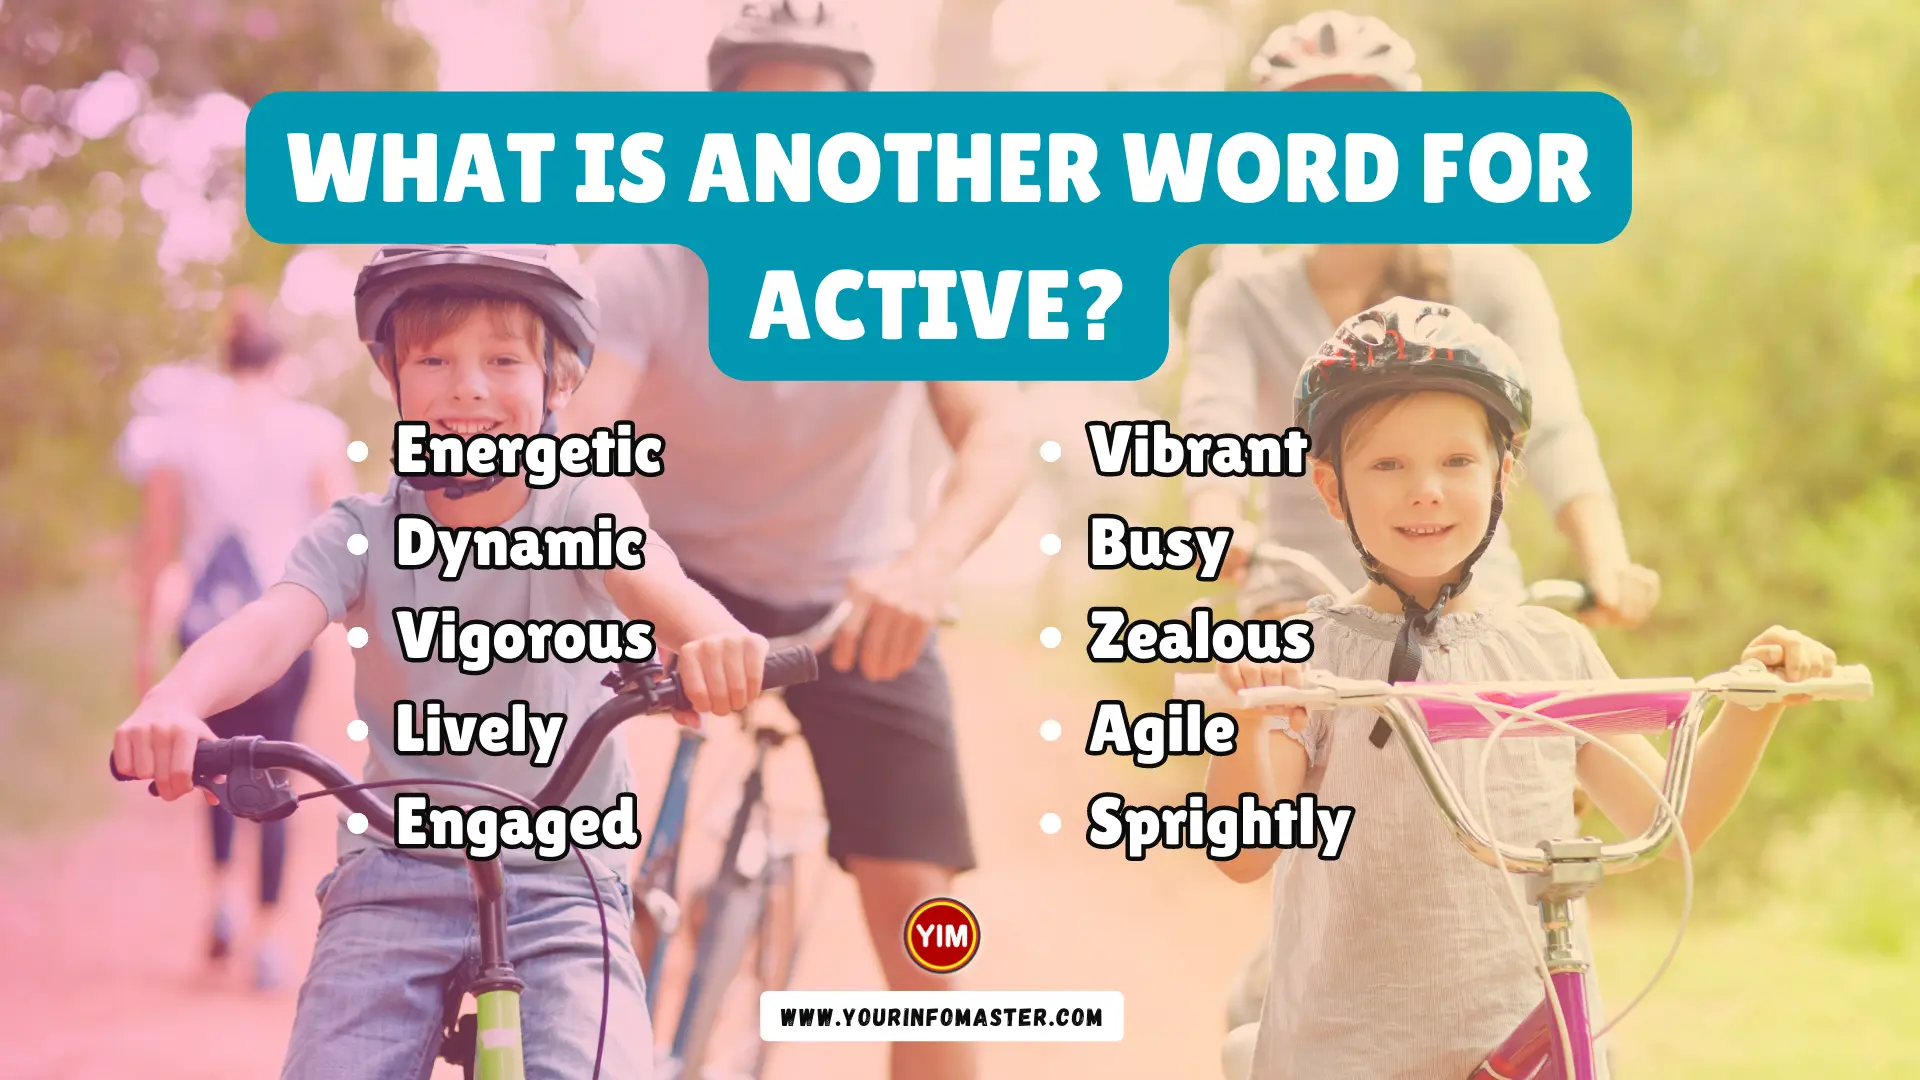 What is another word for Active